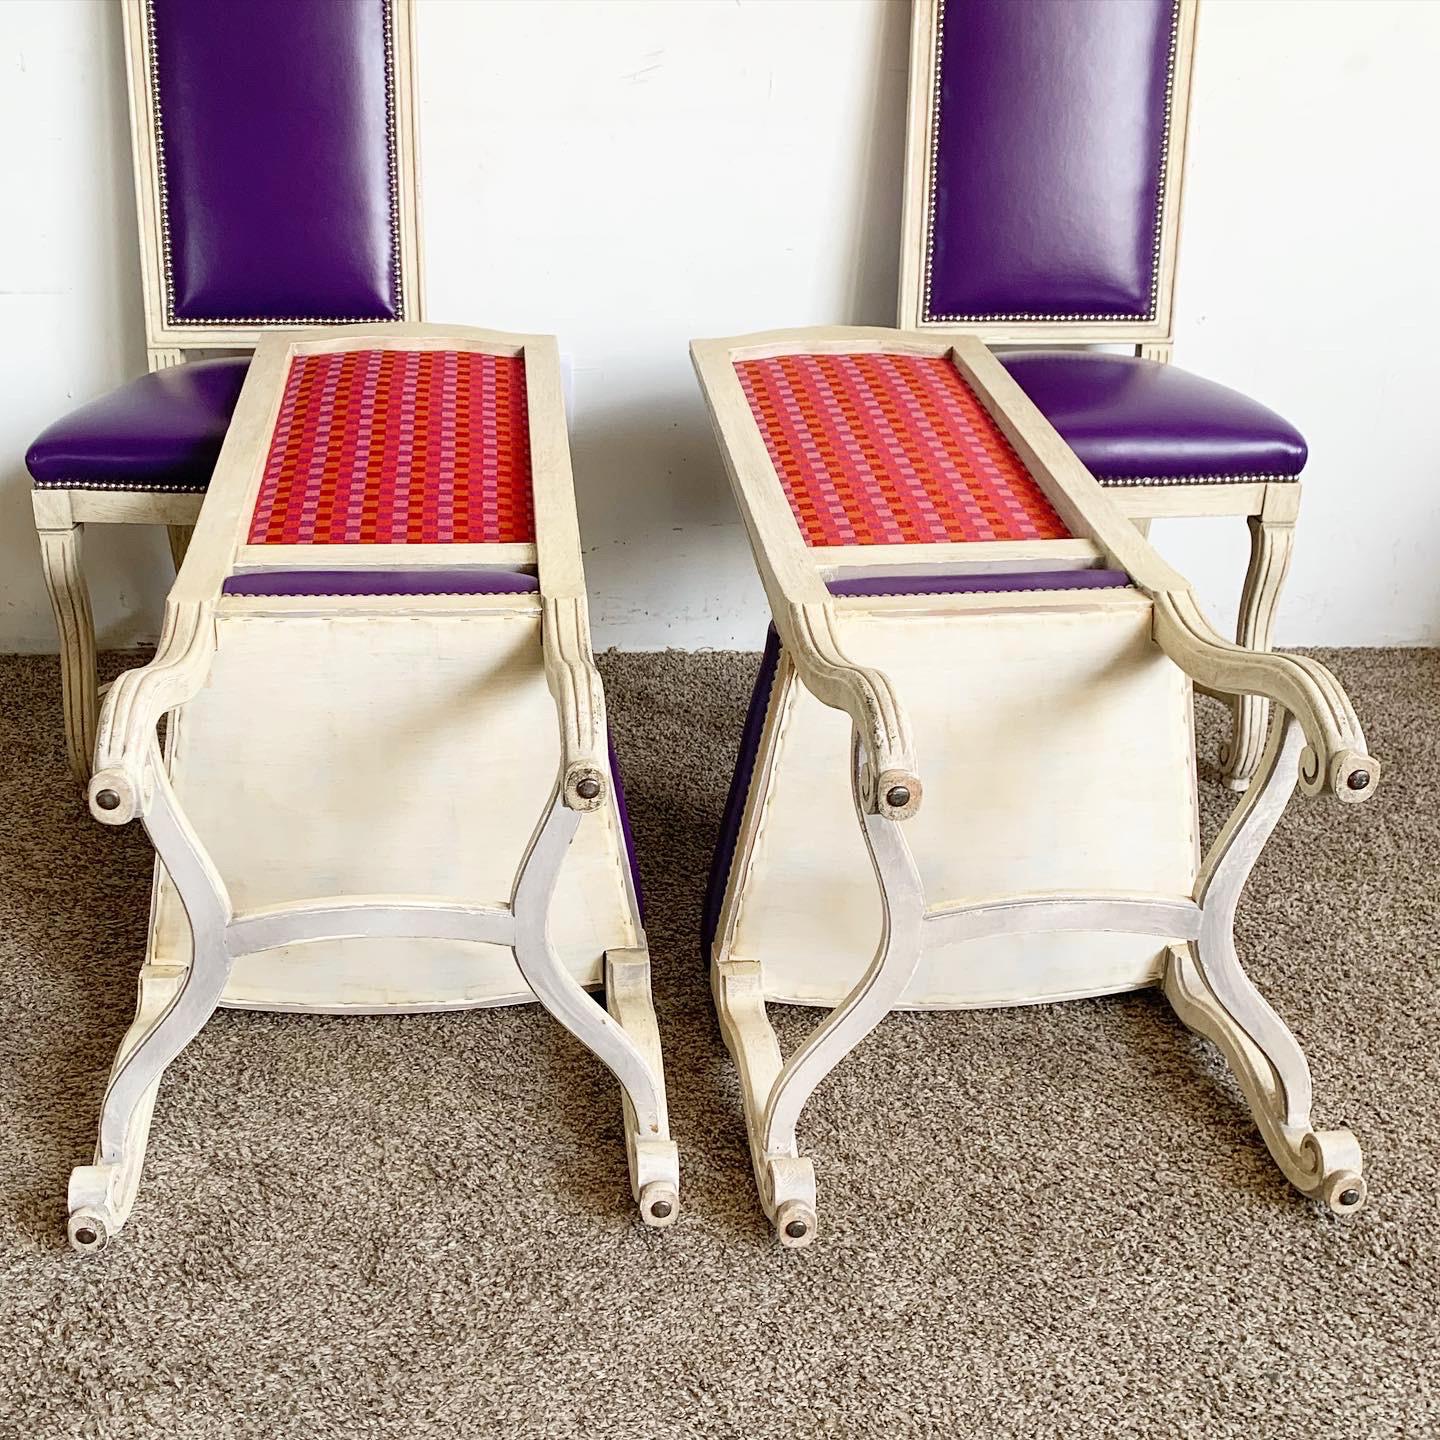 French Provincial Purple Vinyl and Platted Back Dining Chairs - Set of 4 For Sale 3